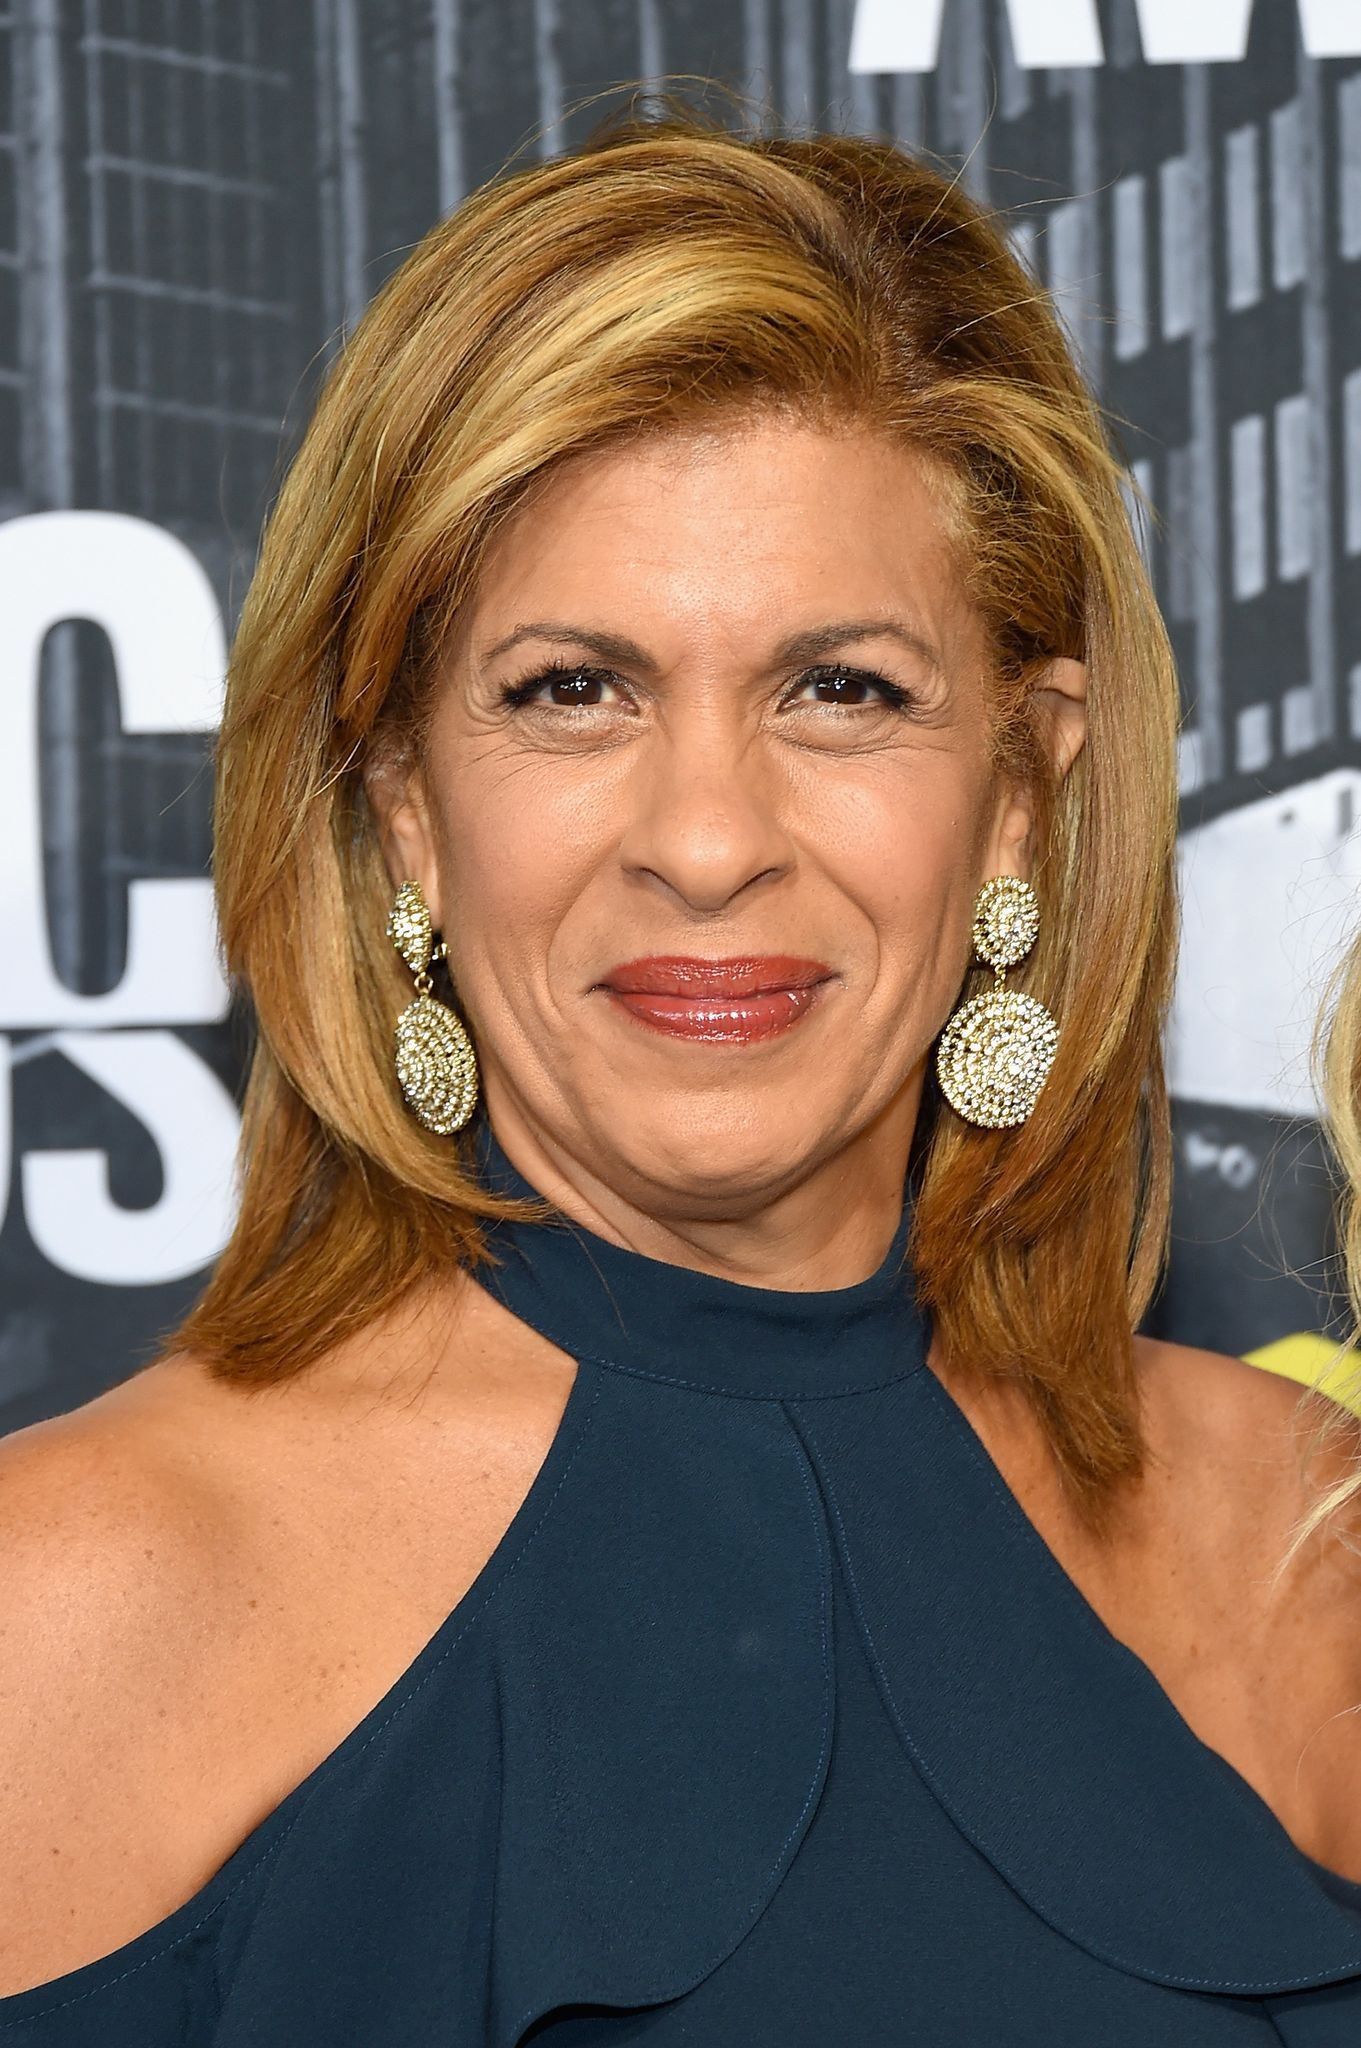 Hoda Kotb at the 2017 CMT Music Awards at the Music City Center on June 7, 2017 in Nashville, Tennessee. | Photo: Getty Images